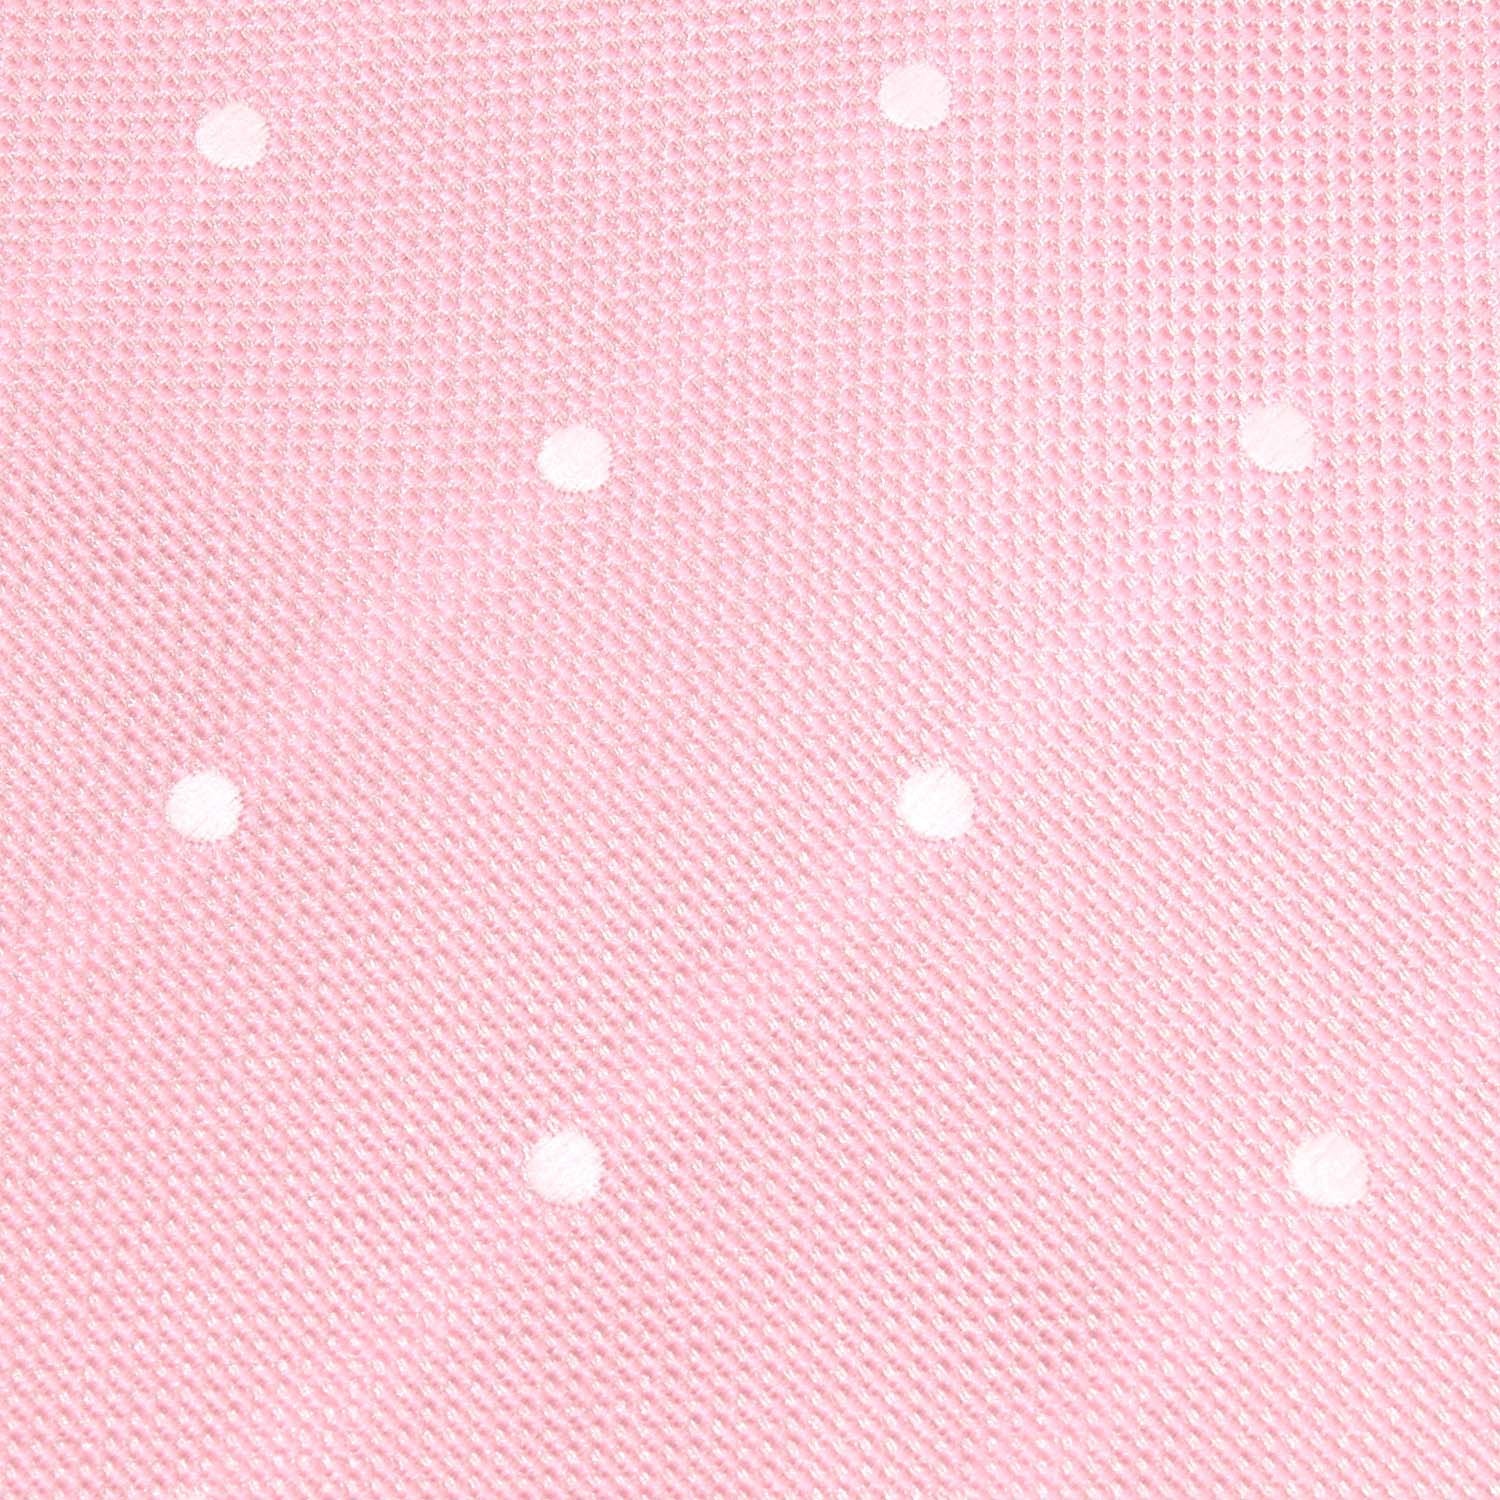 Baby Pink with White Polka Dots Fabric Pocket Square X238